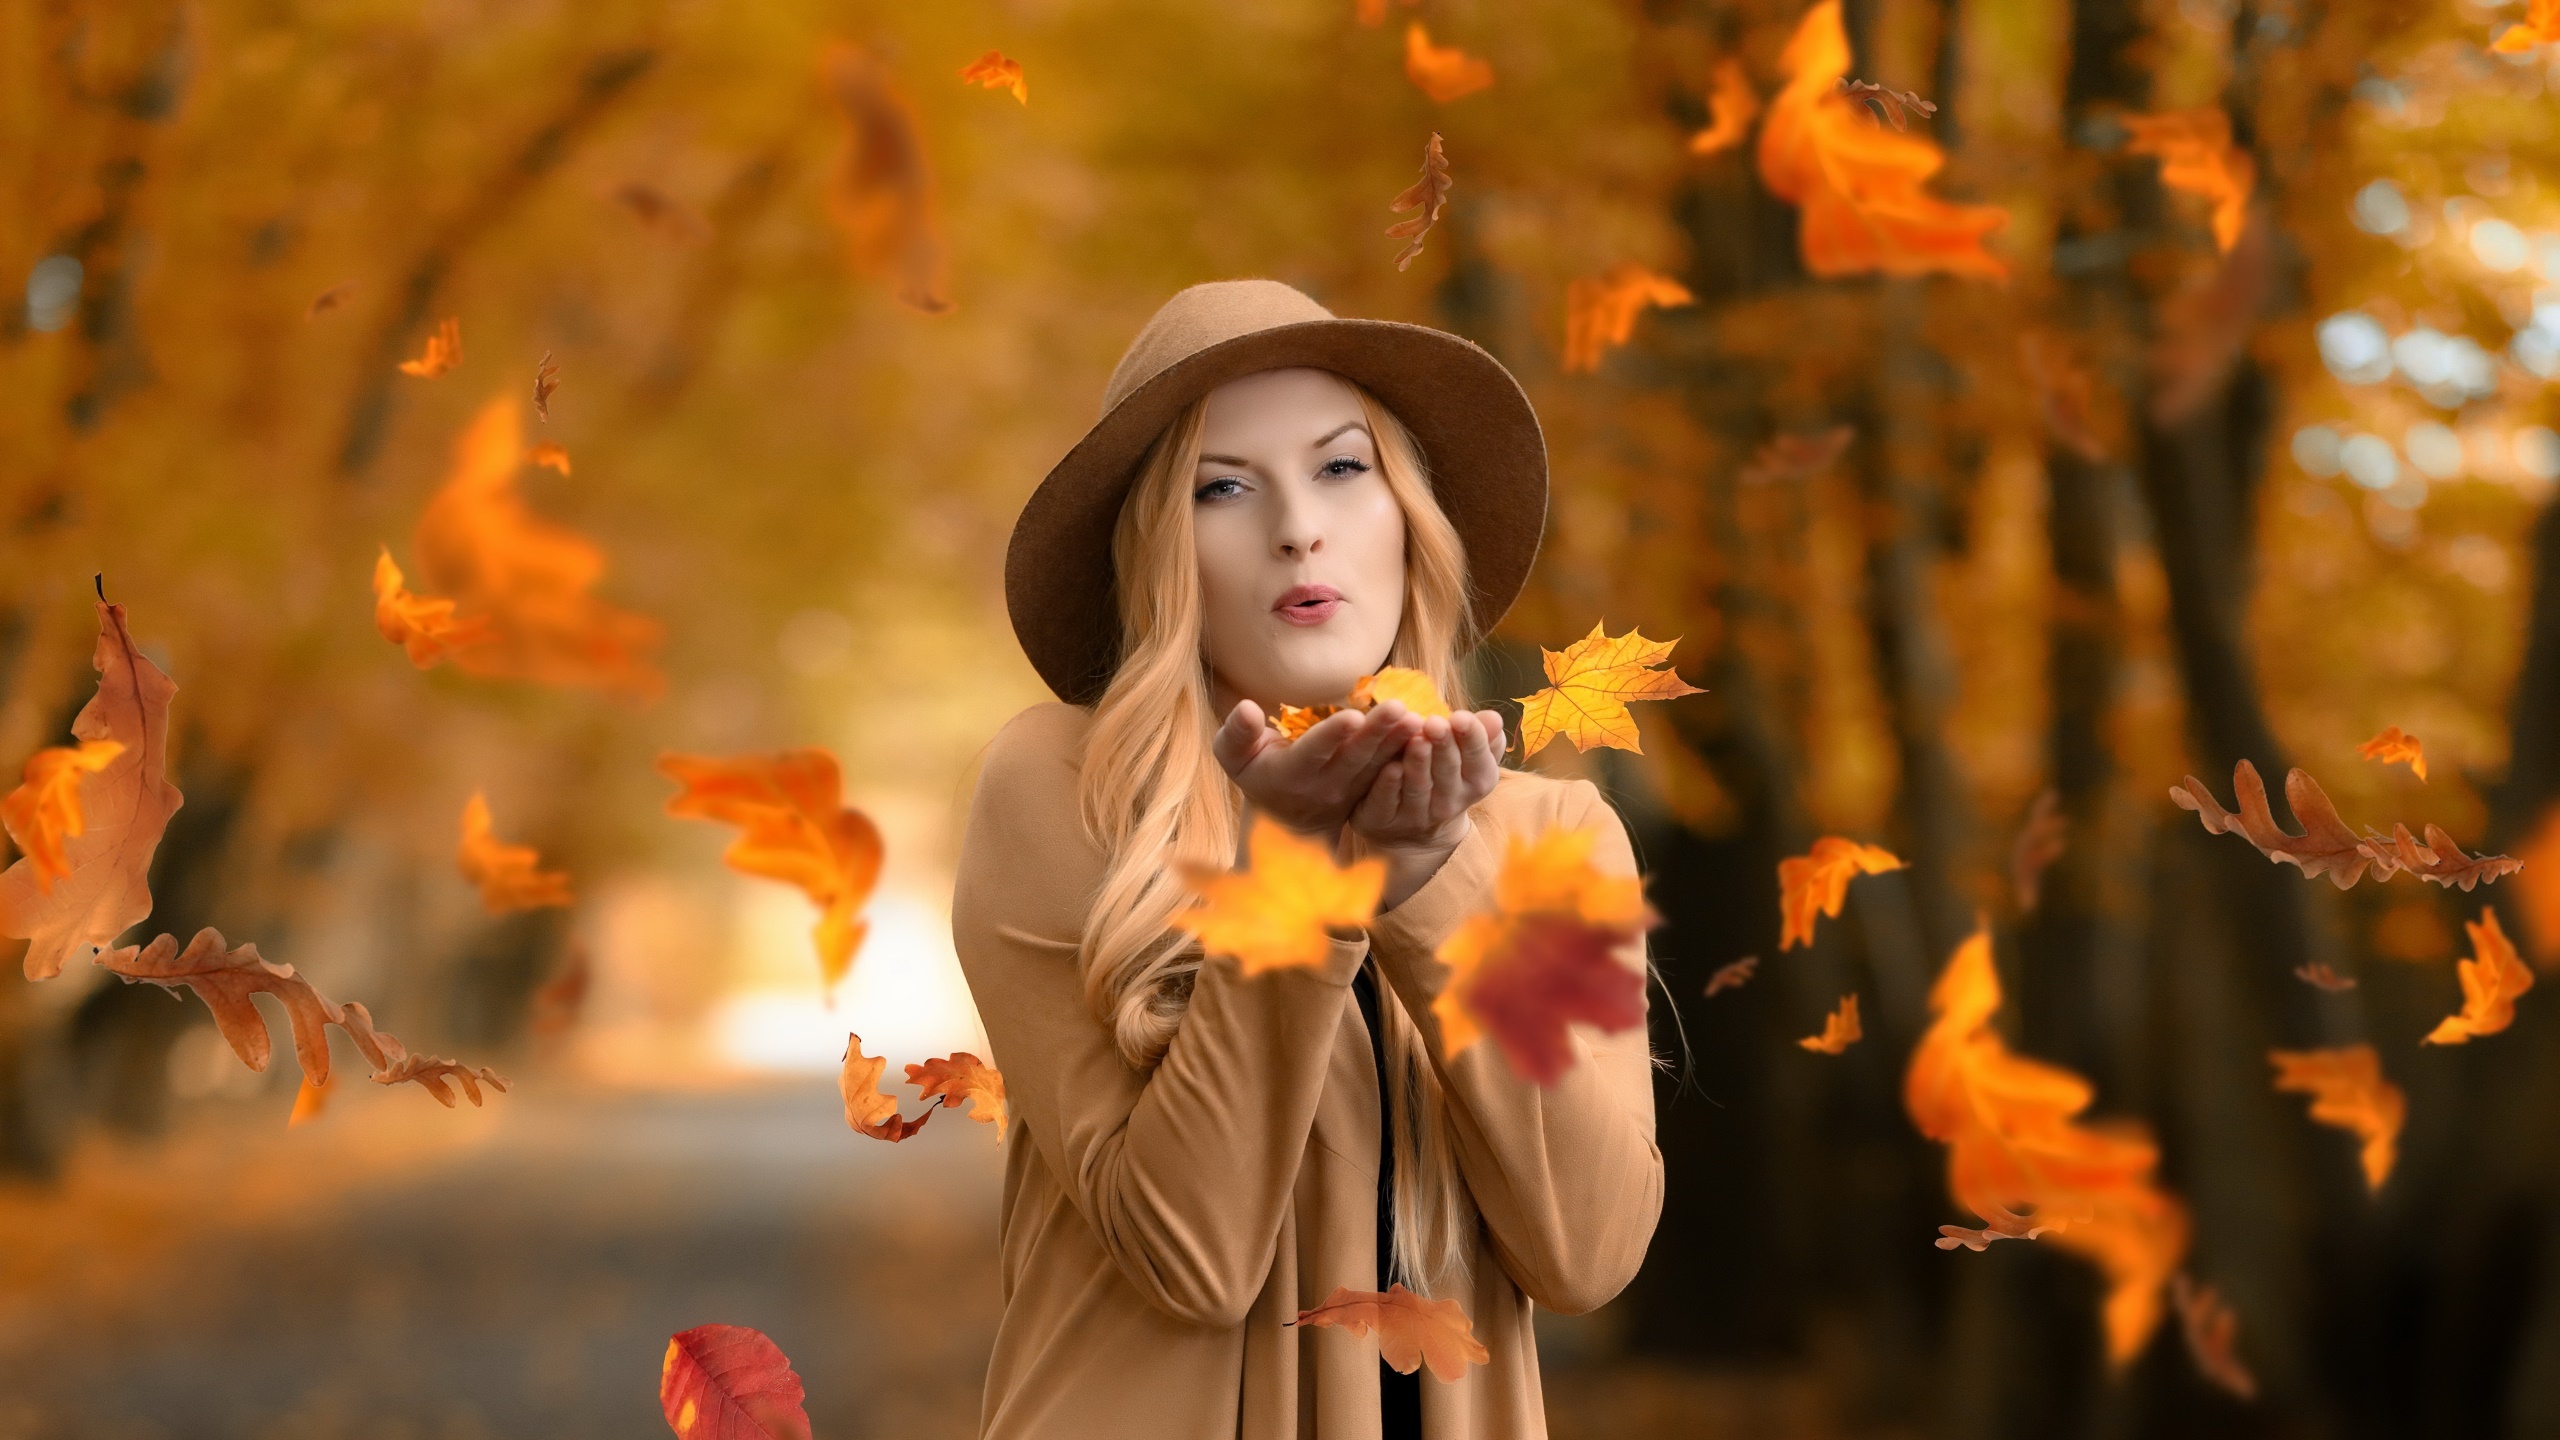 People 2560x1440 women model hat women with hats women outdoors fall outdoors makeup pale dyed hair red lipstick fallen leaves autumn women blowing kisses